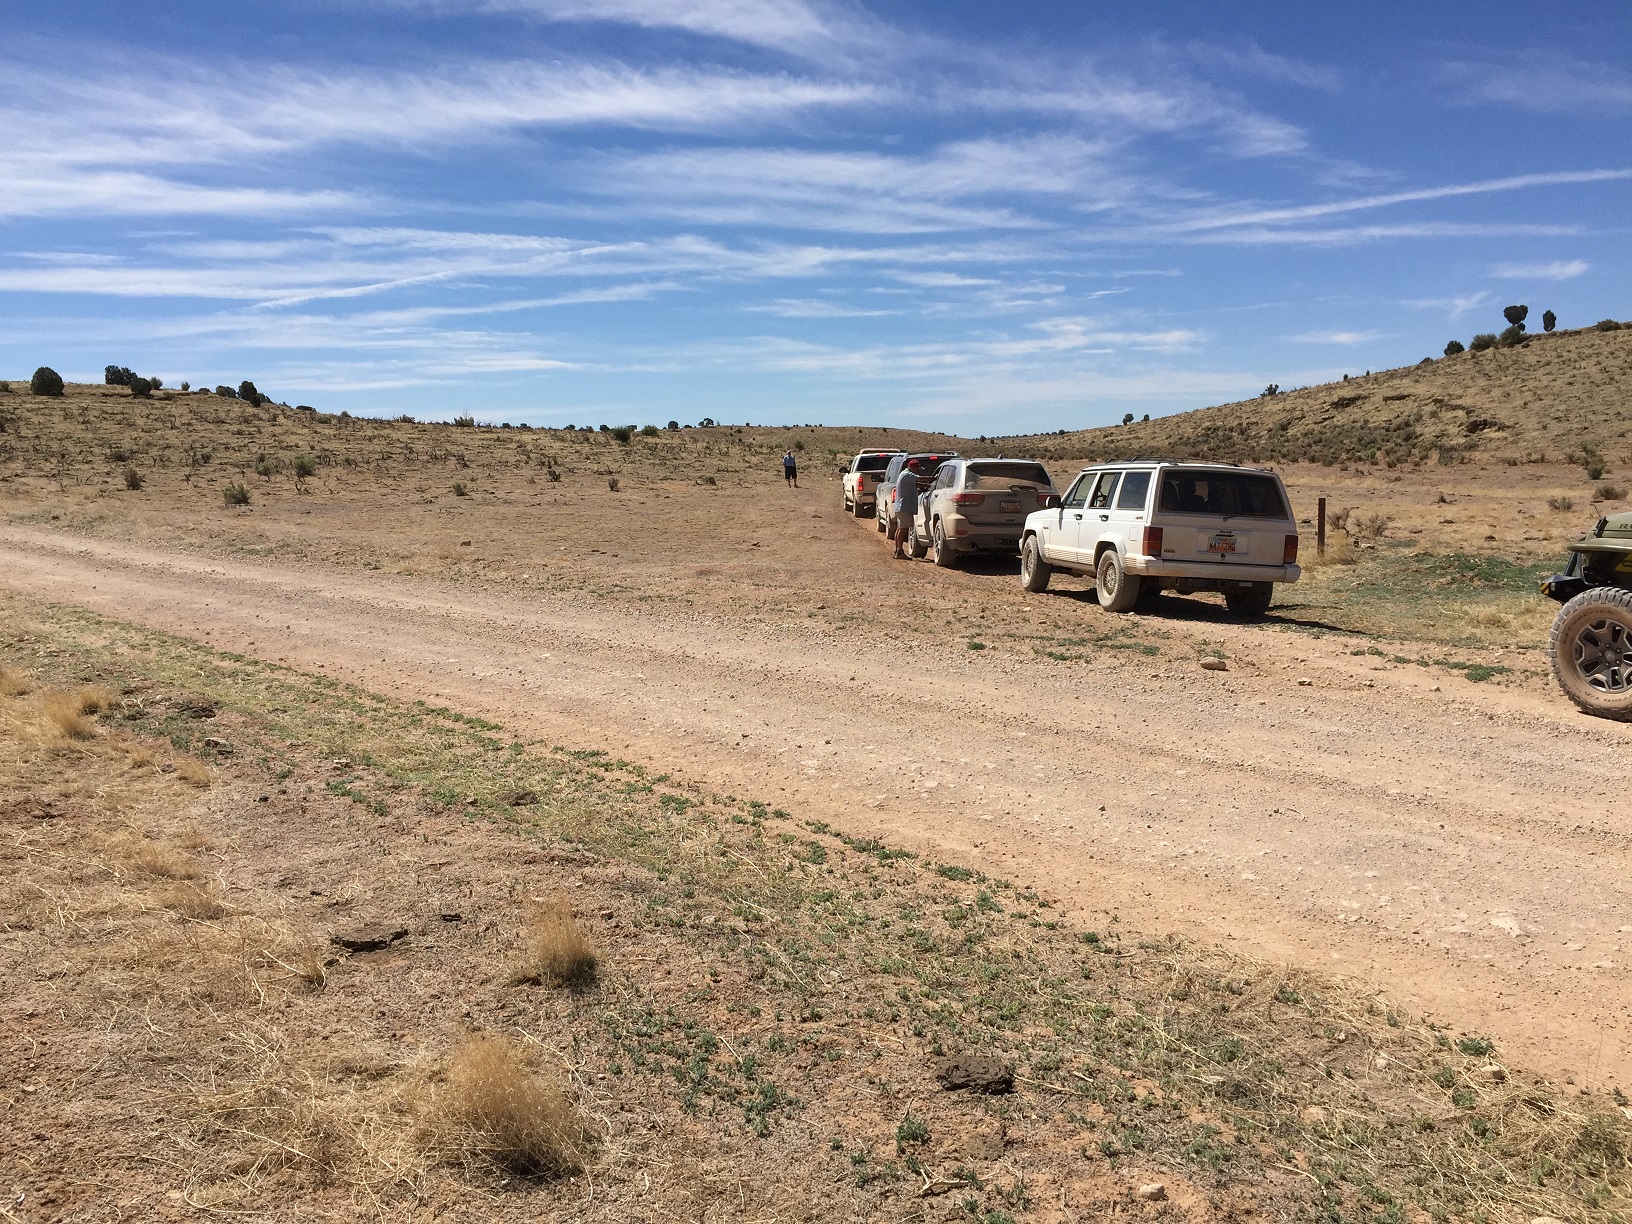 A caravan of cars turning from an unmarked road onto BLM Road 1058 on the Arizona Strip